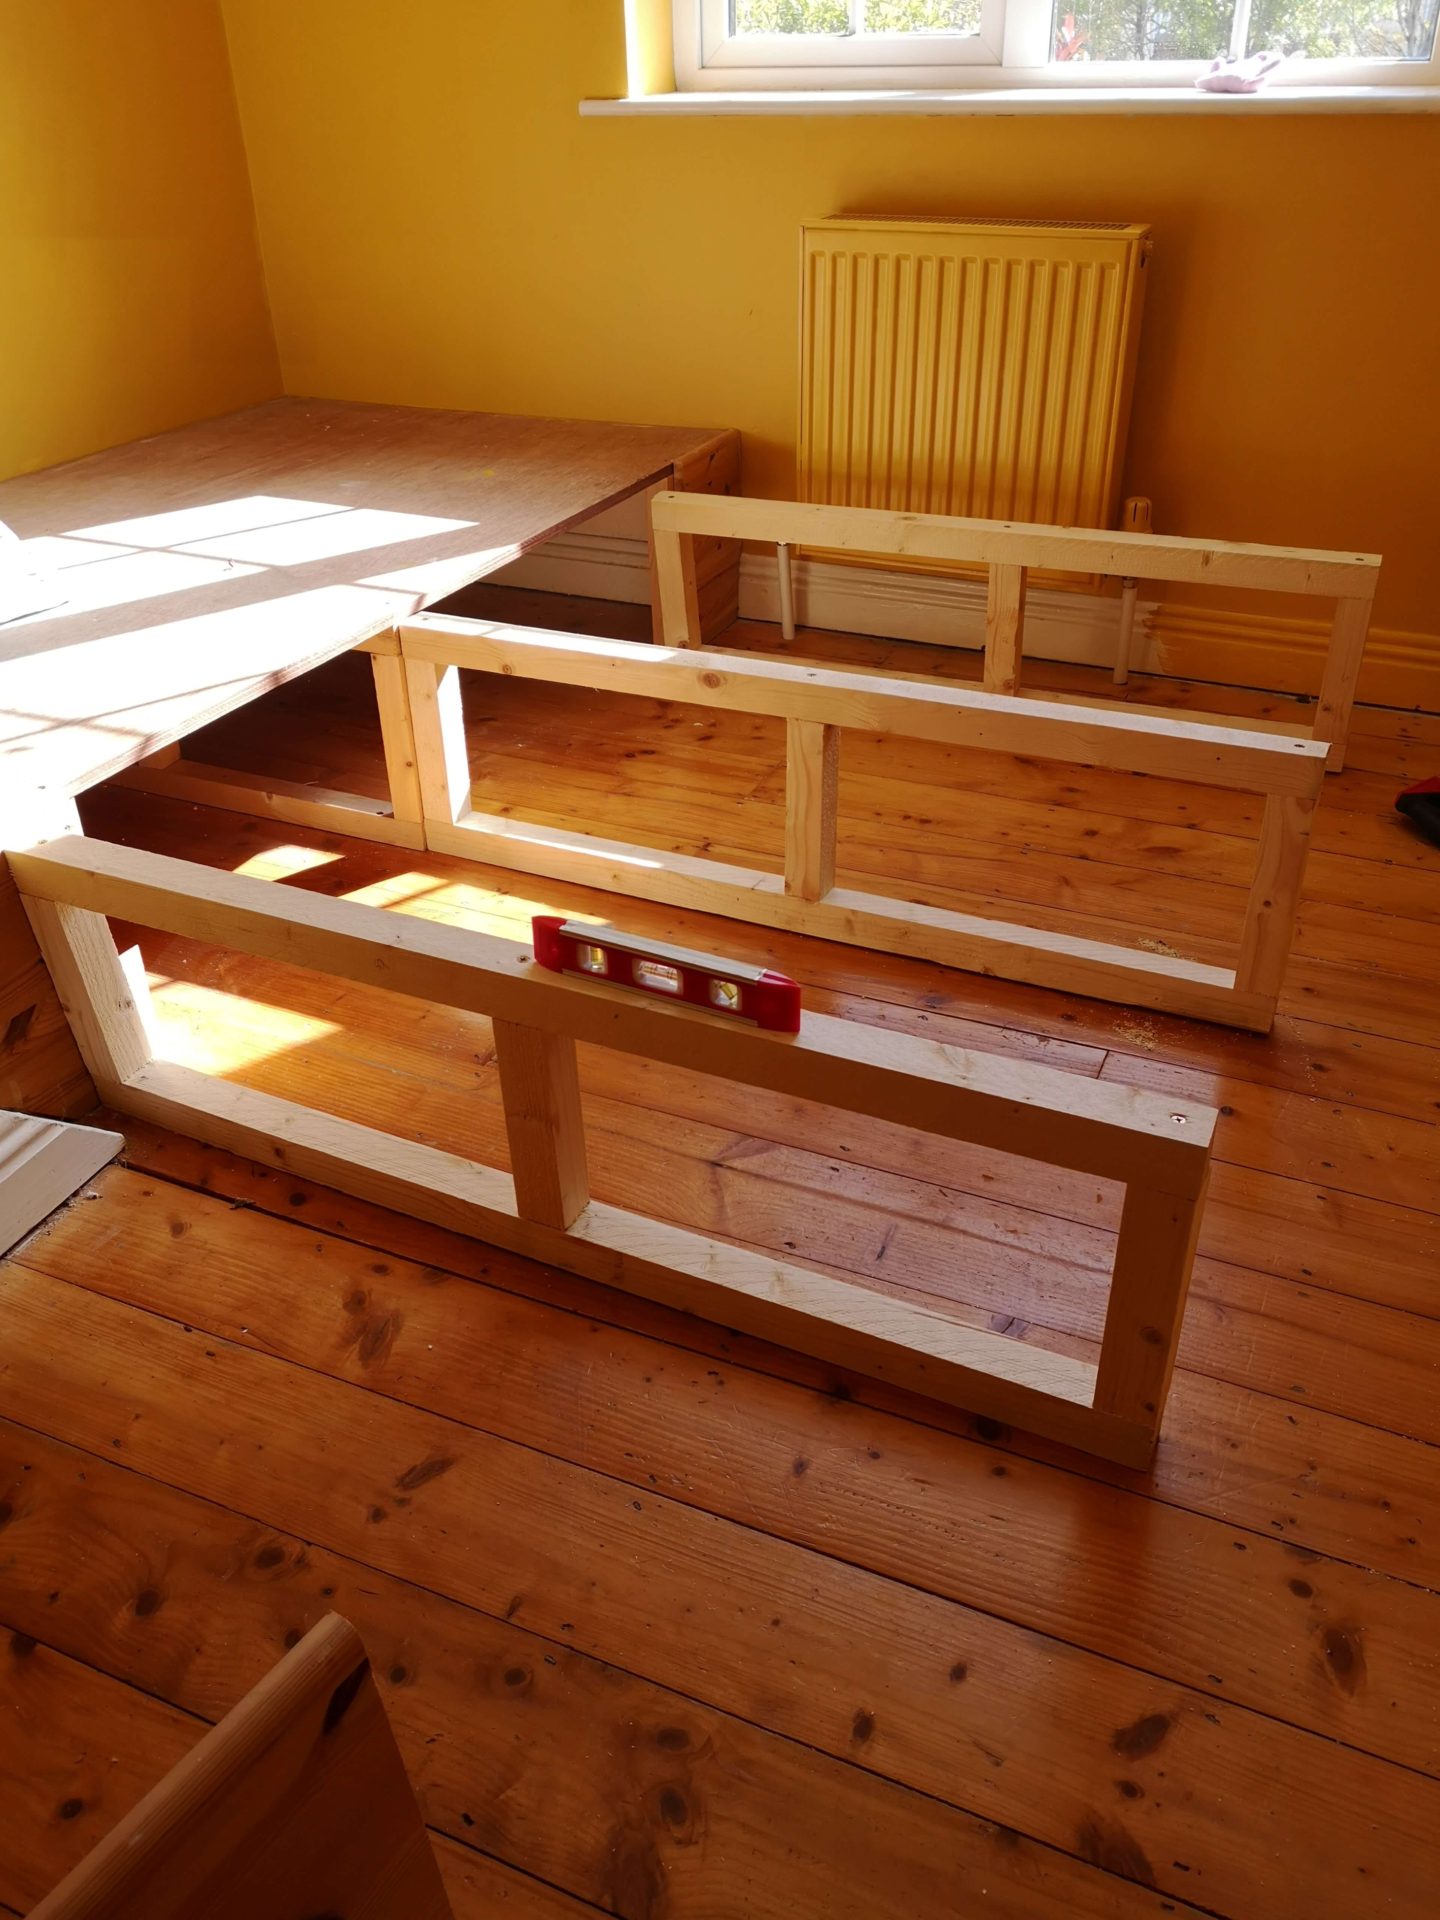 3 rectangular frames attached to an original single bed base. Creating the frame of the double bed base.